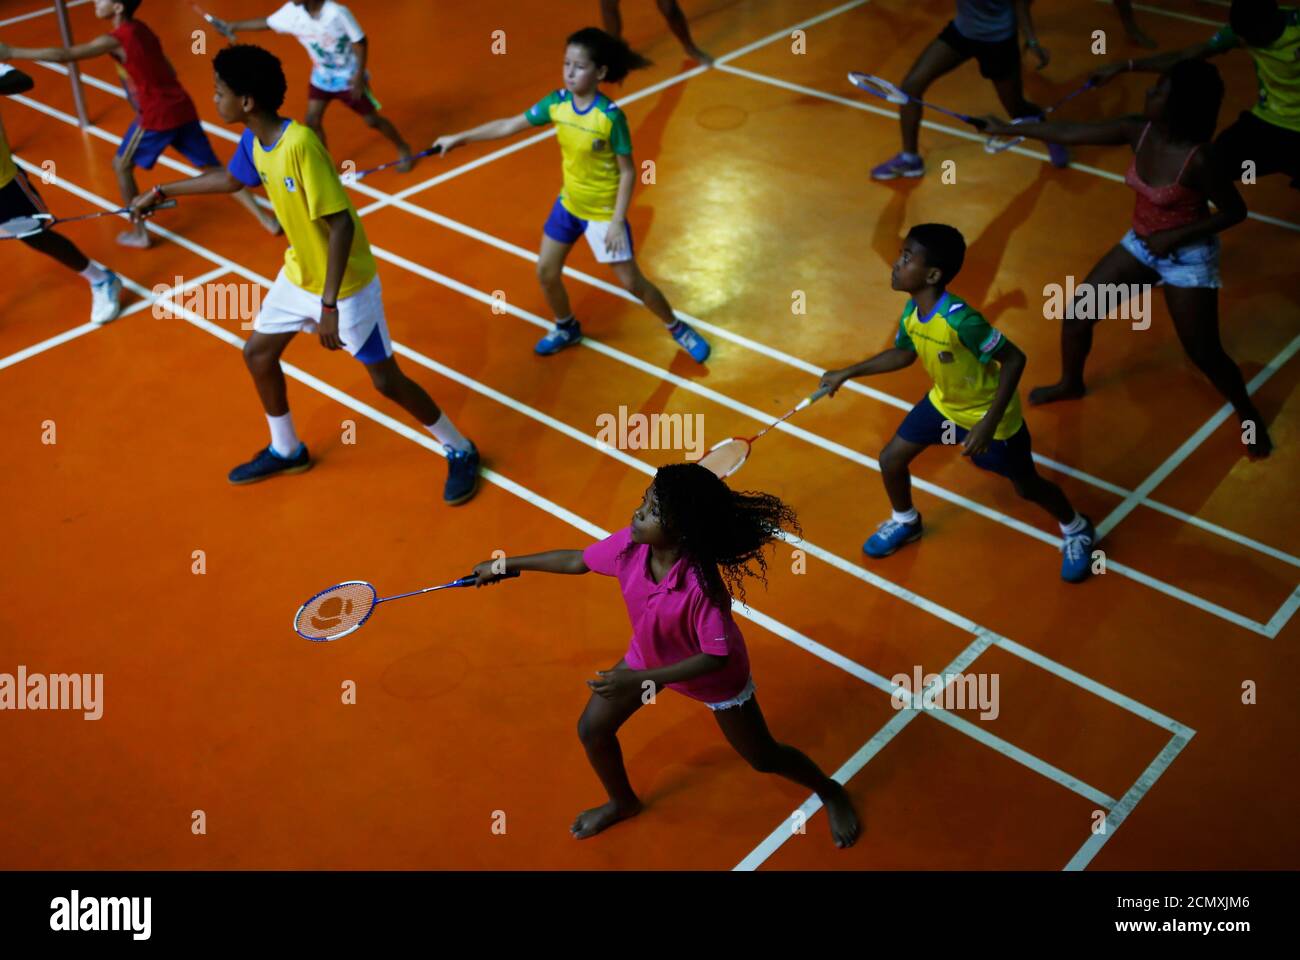 2016 Rio Olympics - Badminton - Rio de Janeiro, Brazil - 19/08/2016.  Youngsters warm up choreographed to samba music during badminton class at  Miratus school in the Chacrinha favela. REUTERS/Nacho Doce TPX